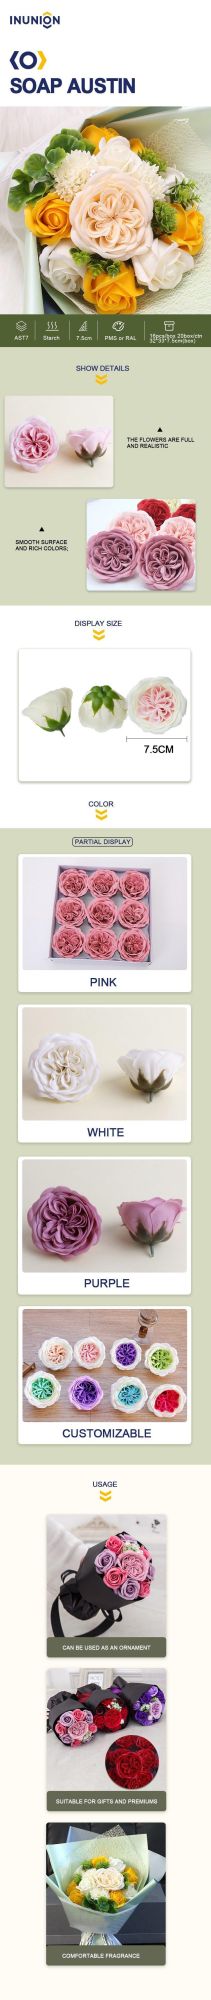 Hot Selling Product Roses Eternel Long Lasting Preserved Austin Soap Rose for Decorations